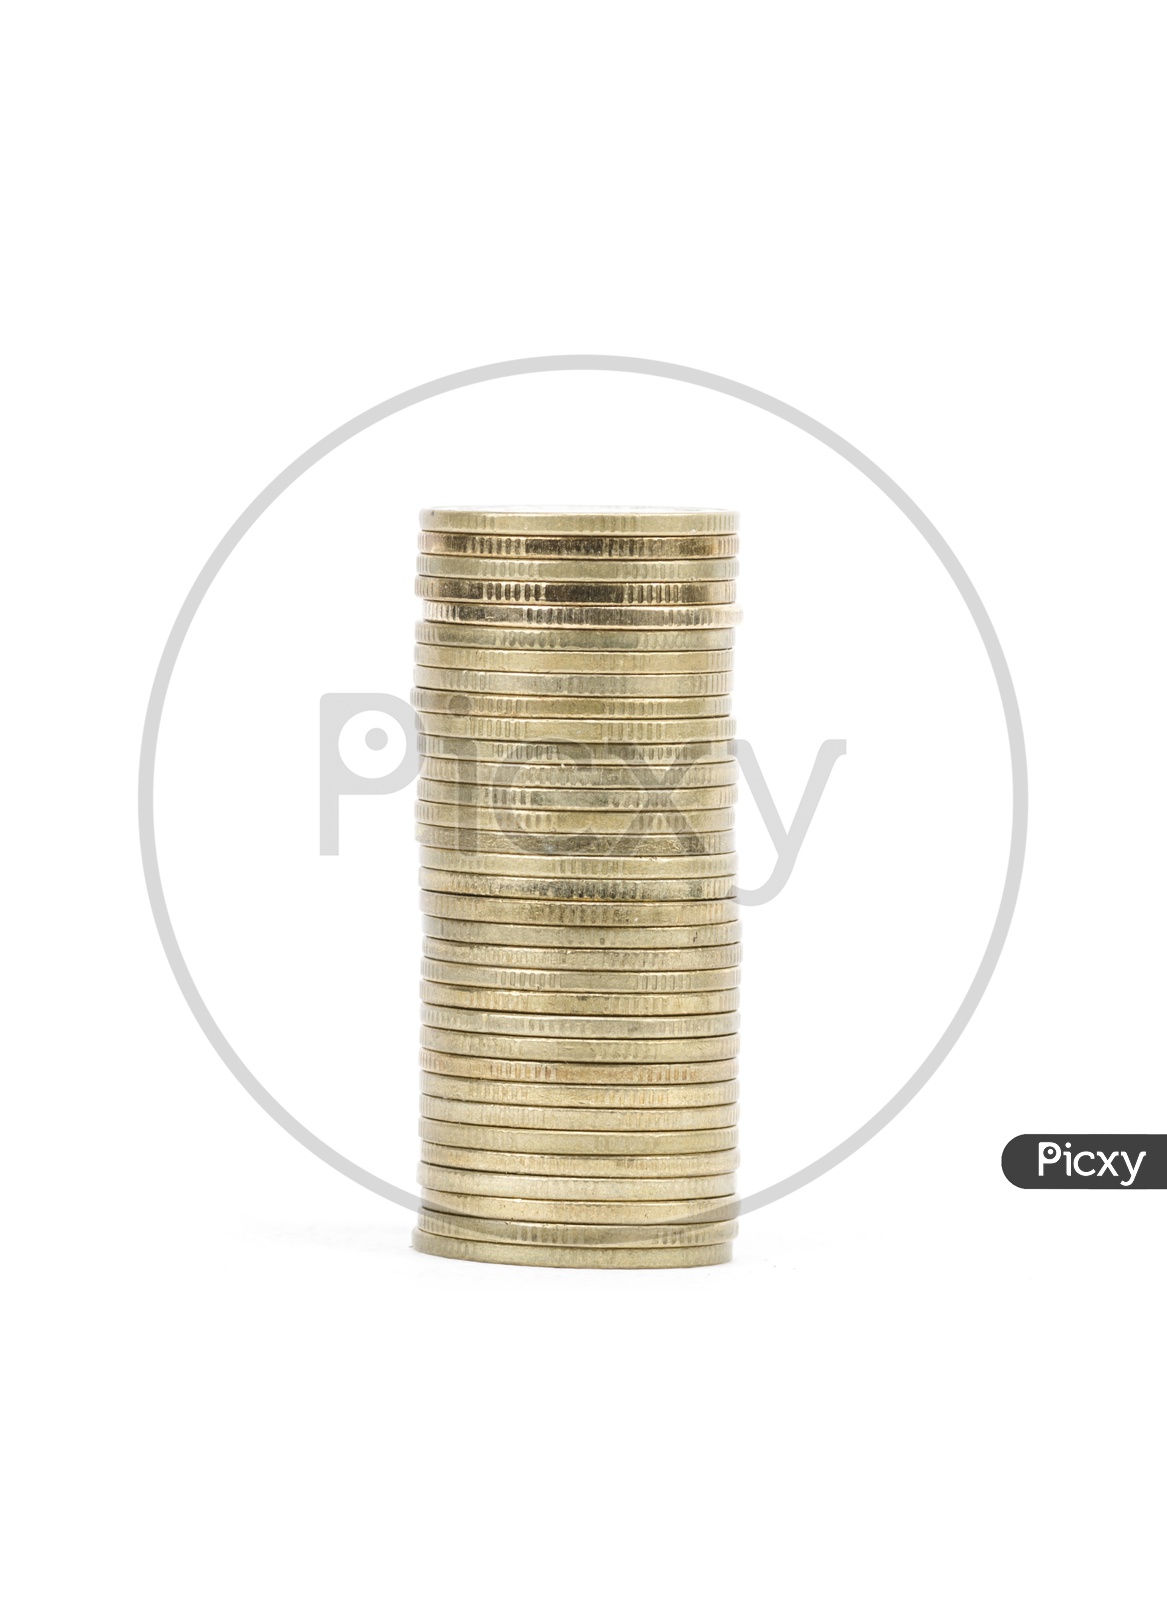 Currency Coins Column Over an Isolated White Background